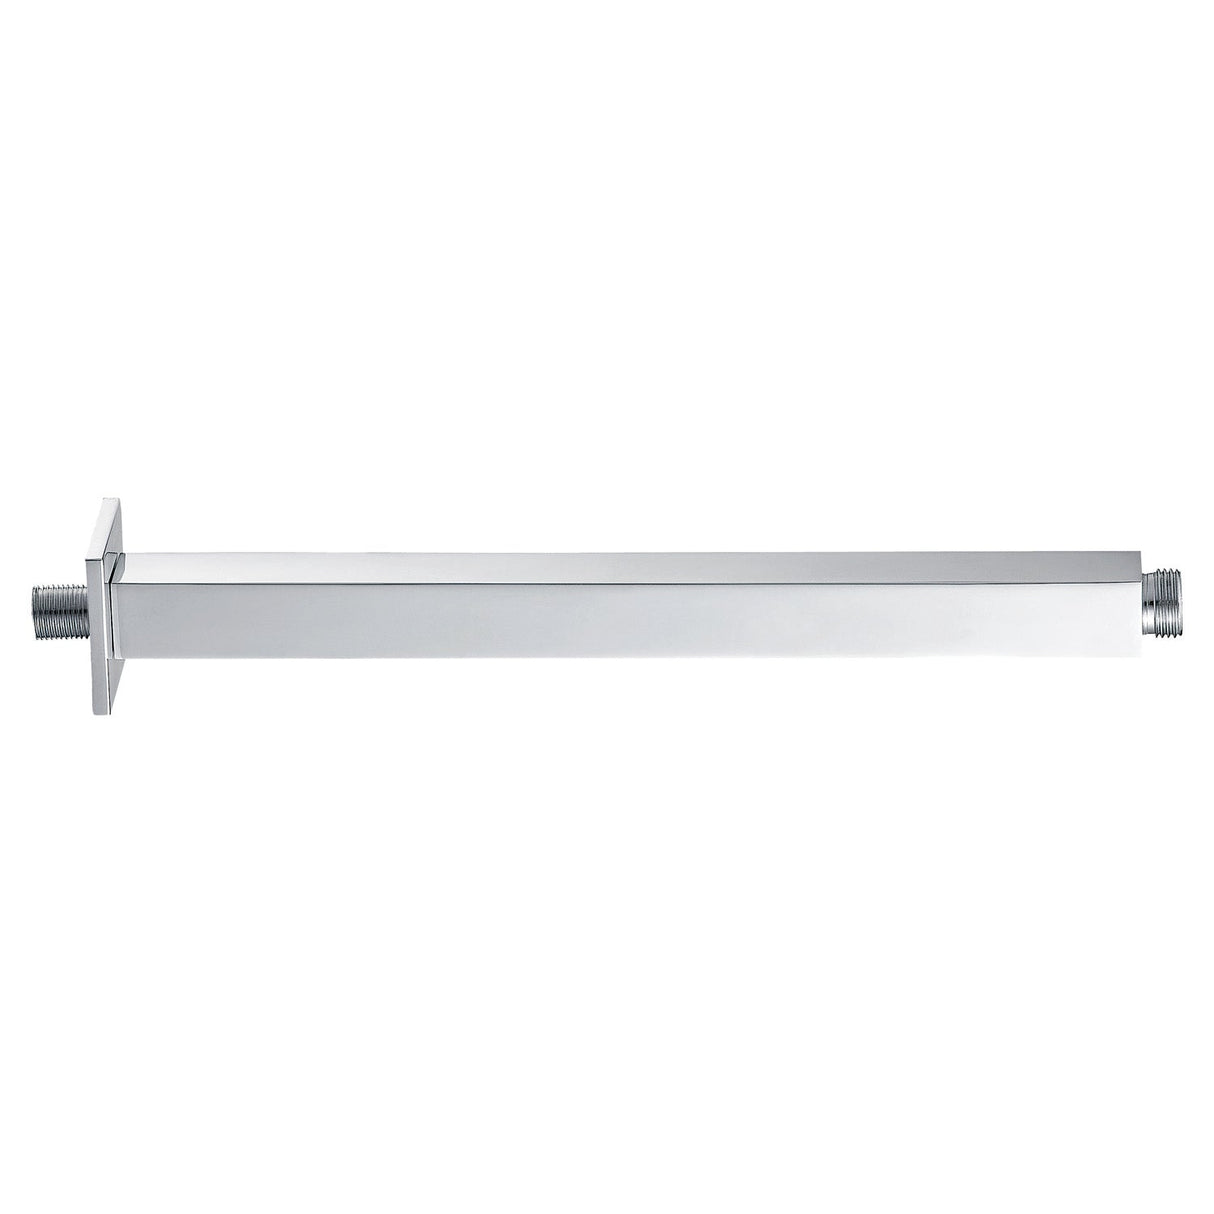 DAX Brass Square Ceiling Shower Arm, 8", Brushed Nickel DAX-1012-200-BN